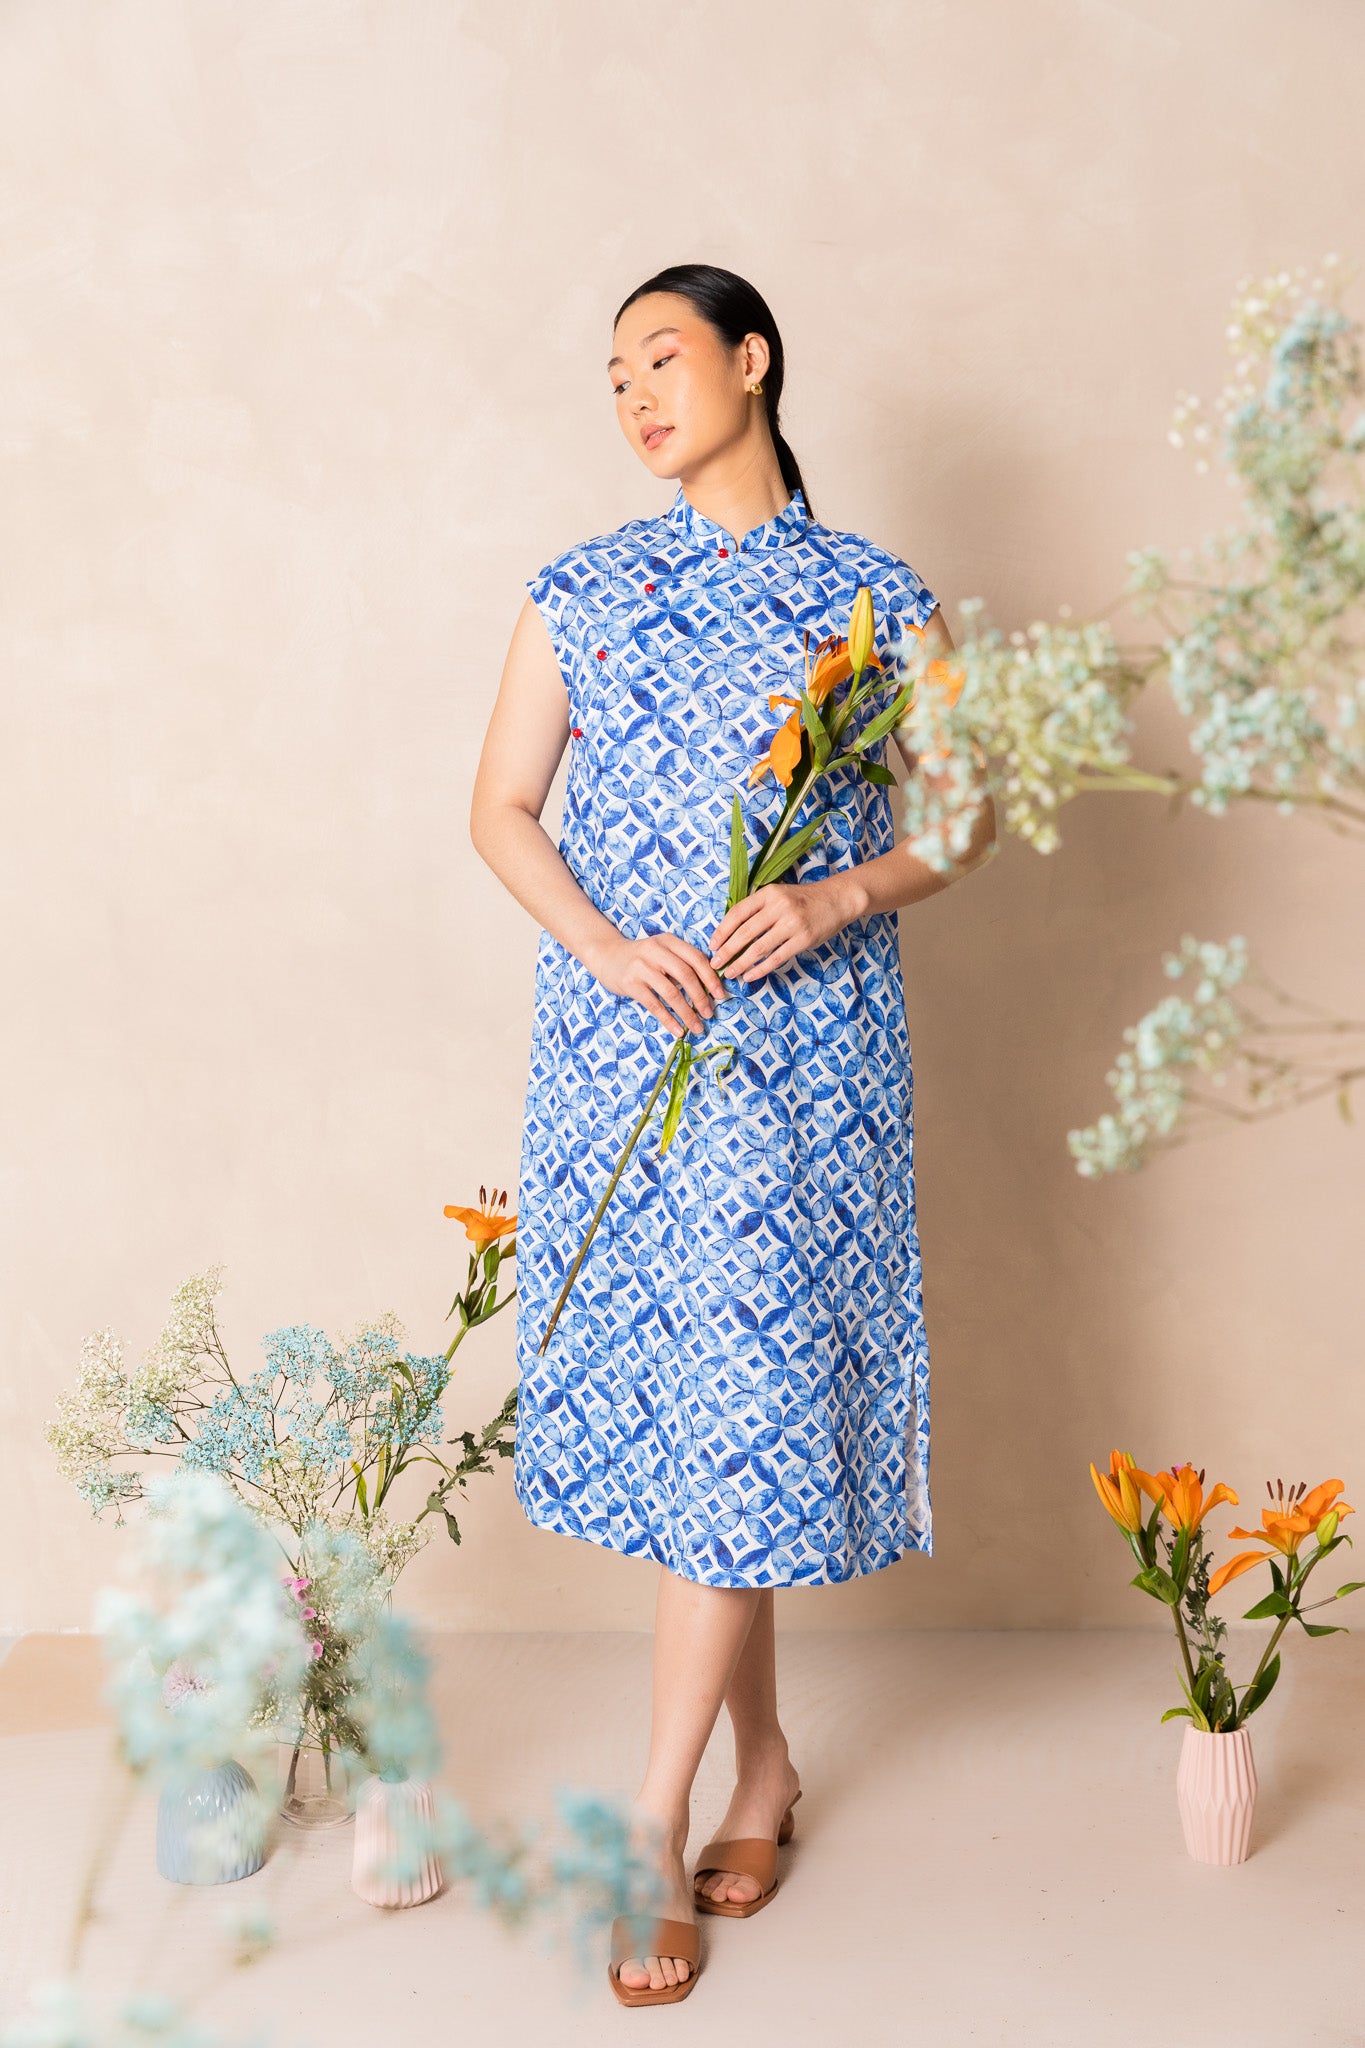 Water Colour Blue Geometric Floral Print Cheongsam Dress, available on You Living